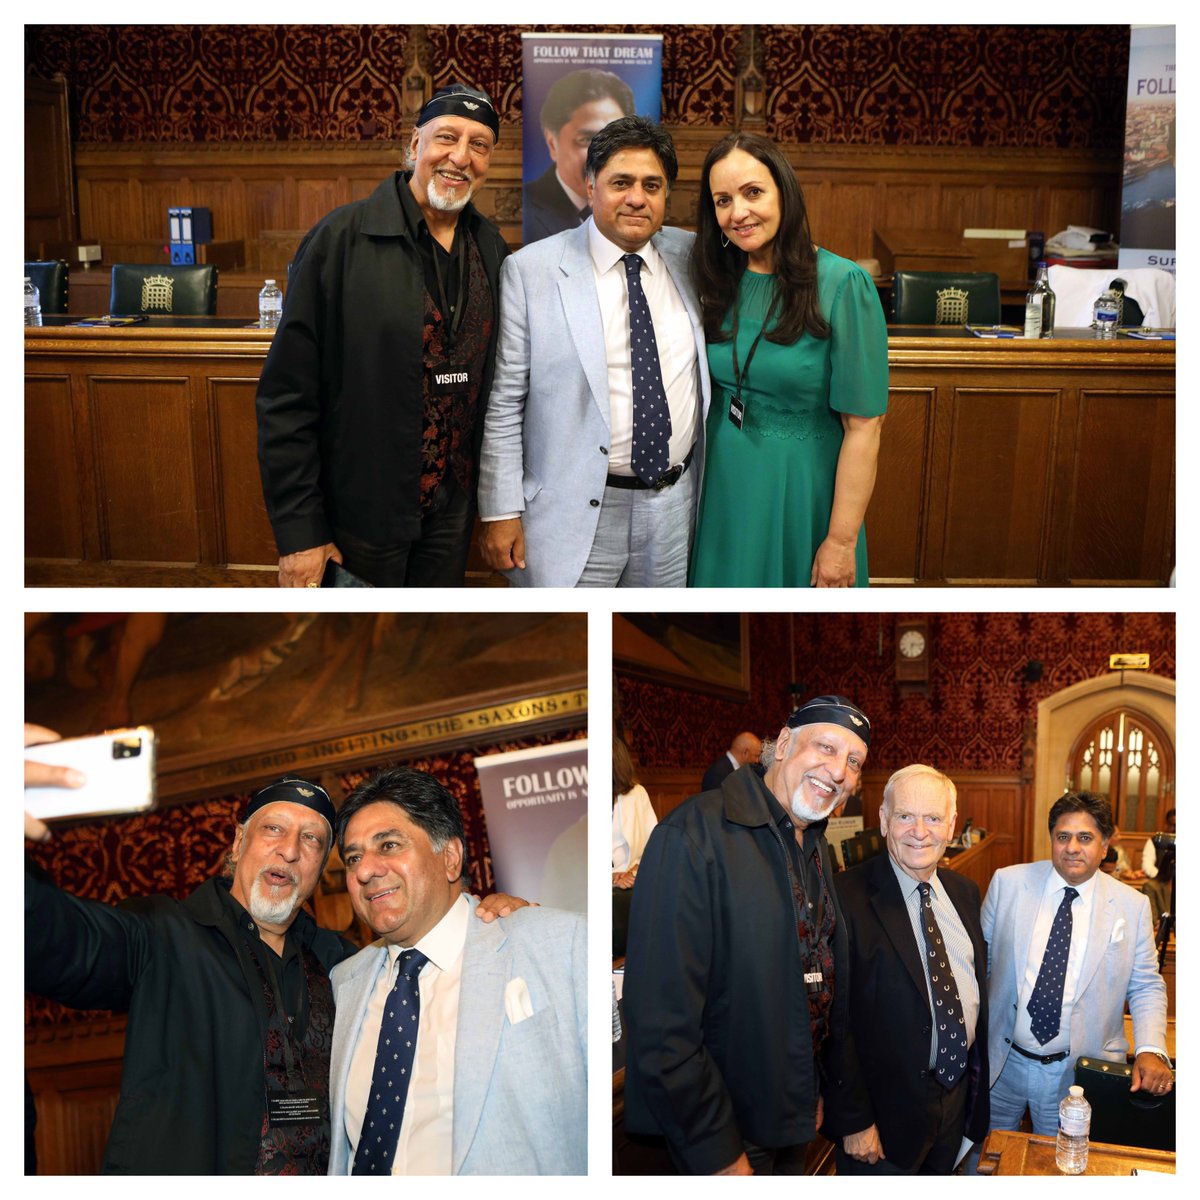 Follow that Dream by Suresh Kumar-  Book Launch House of Commons 26th June 23. 
You can purchase Follow that Dream on Amazon online or sureshkumar.co.uk. 
#LycaRadio #BaliBrahmbhatt